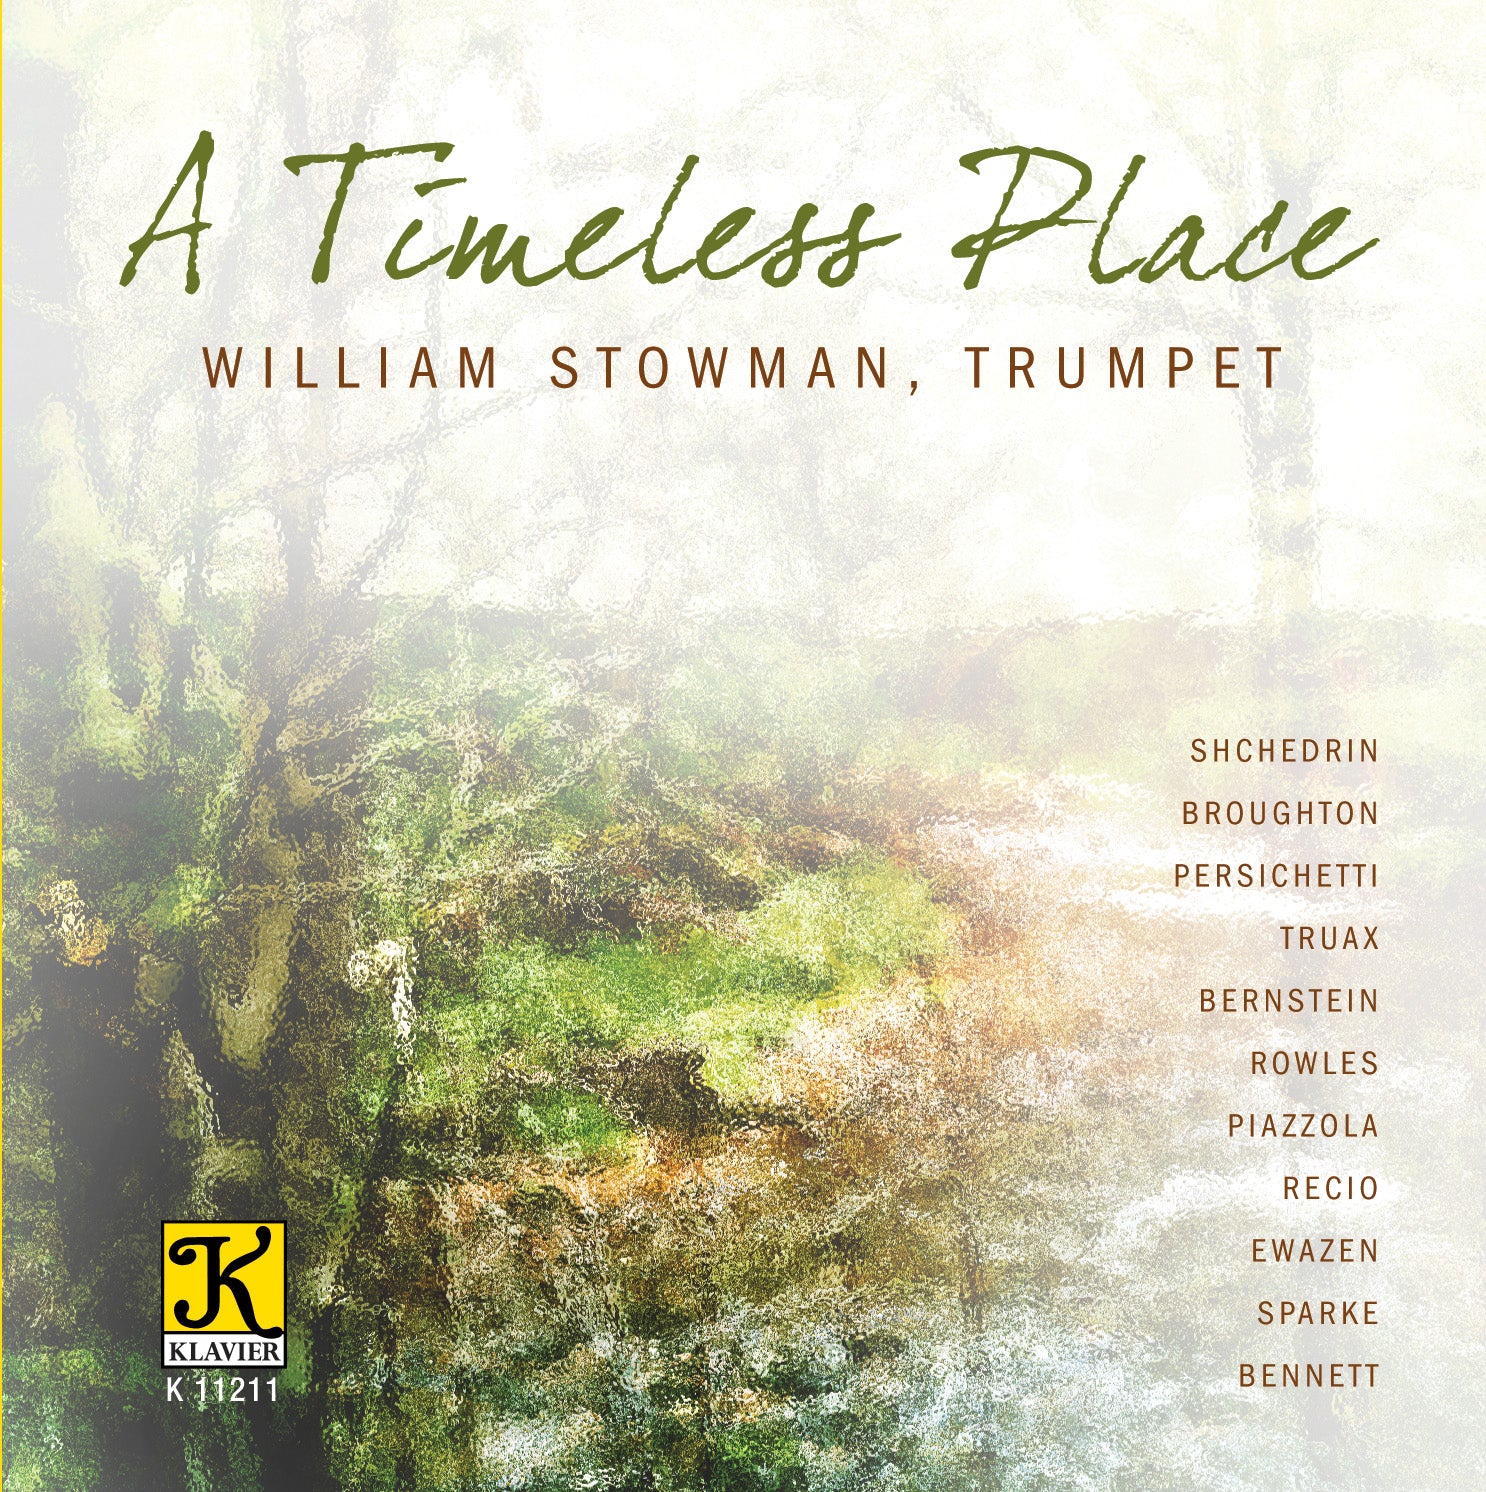 A Timeless Place / William Stowman, trumpet